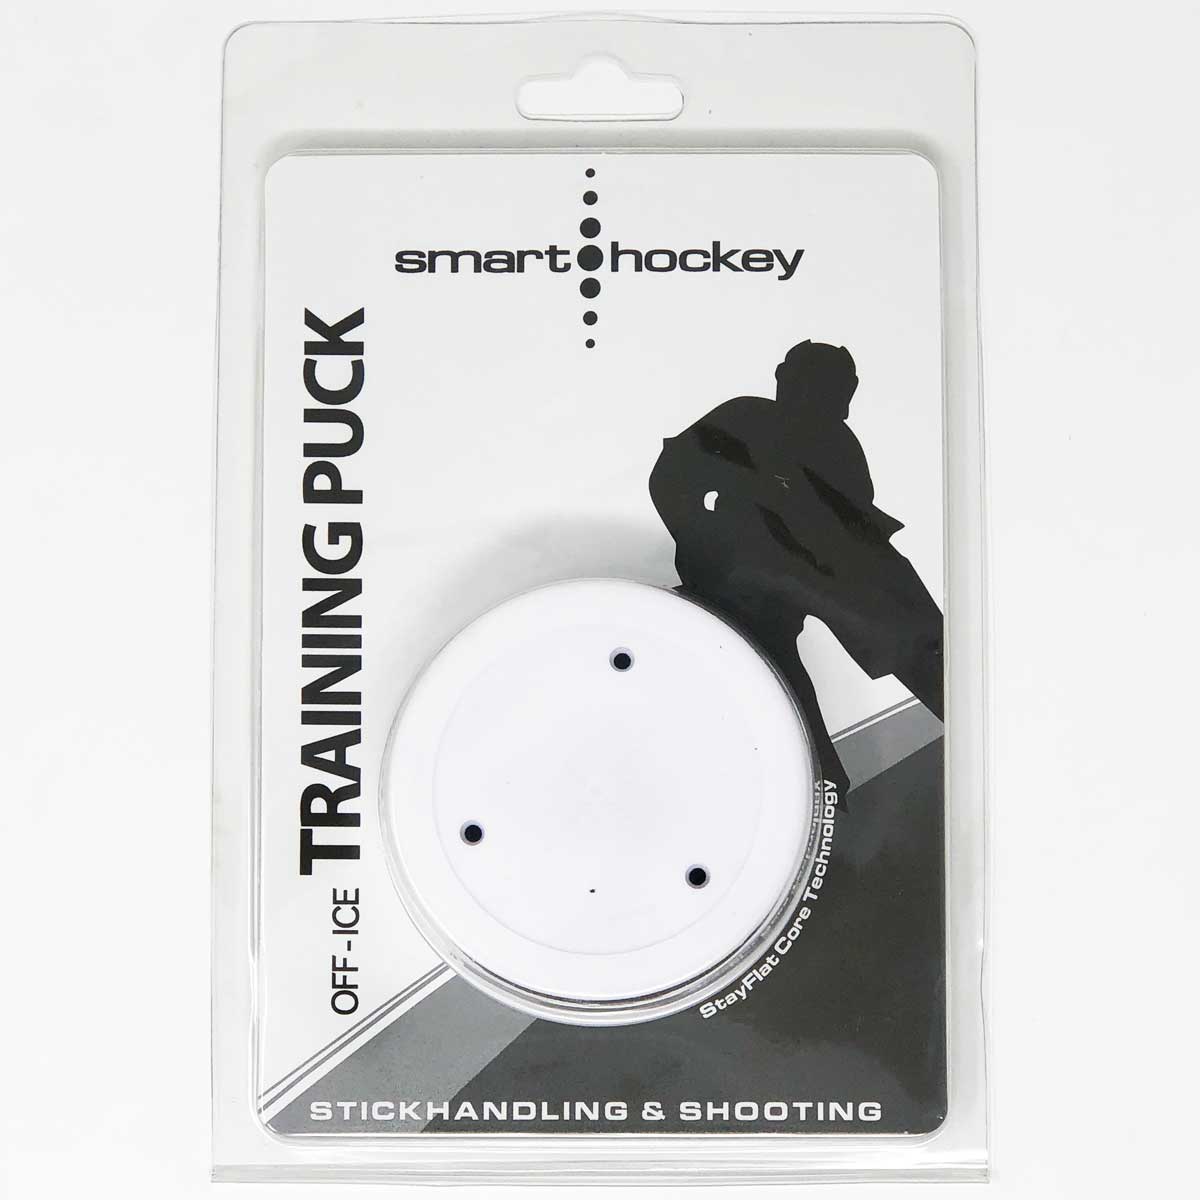 Picture of the white Smarthockey Off-Ice Hockey Training Puck